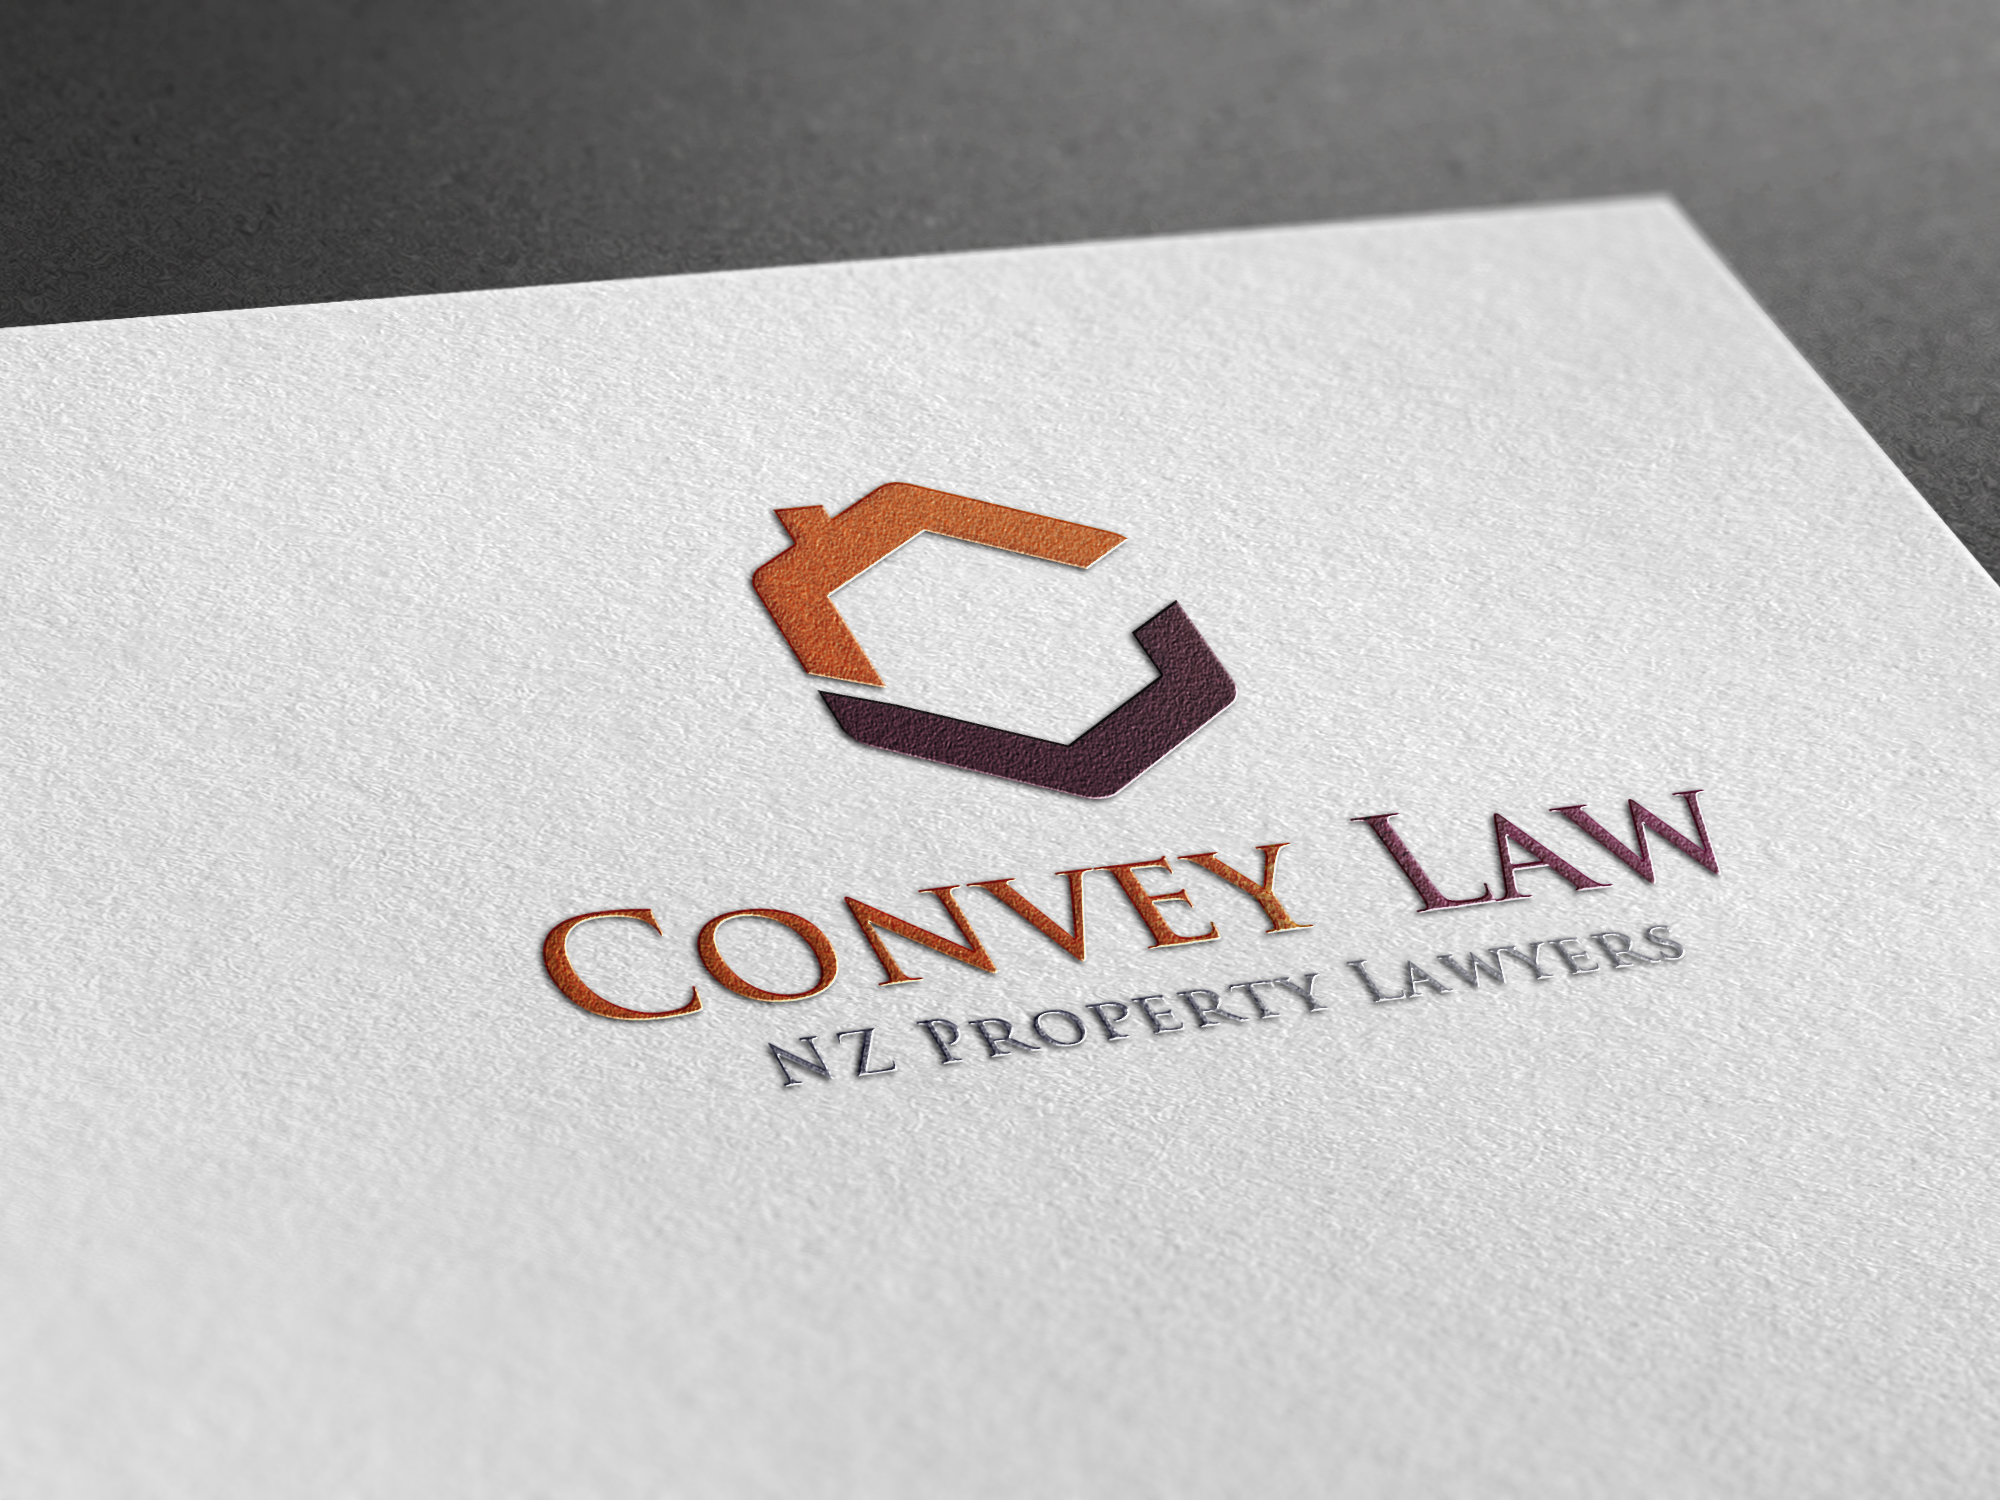 Convey Law : Property lawyers / Conveyancing solicitors - Lawyers ...